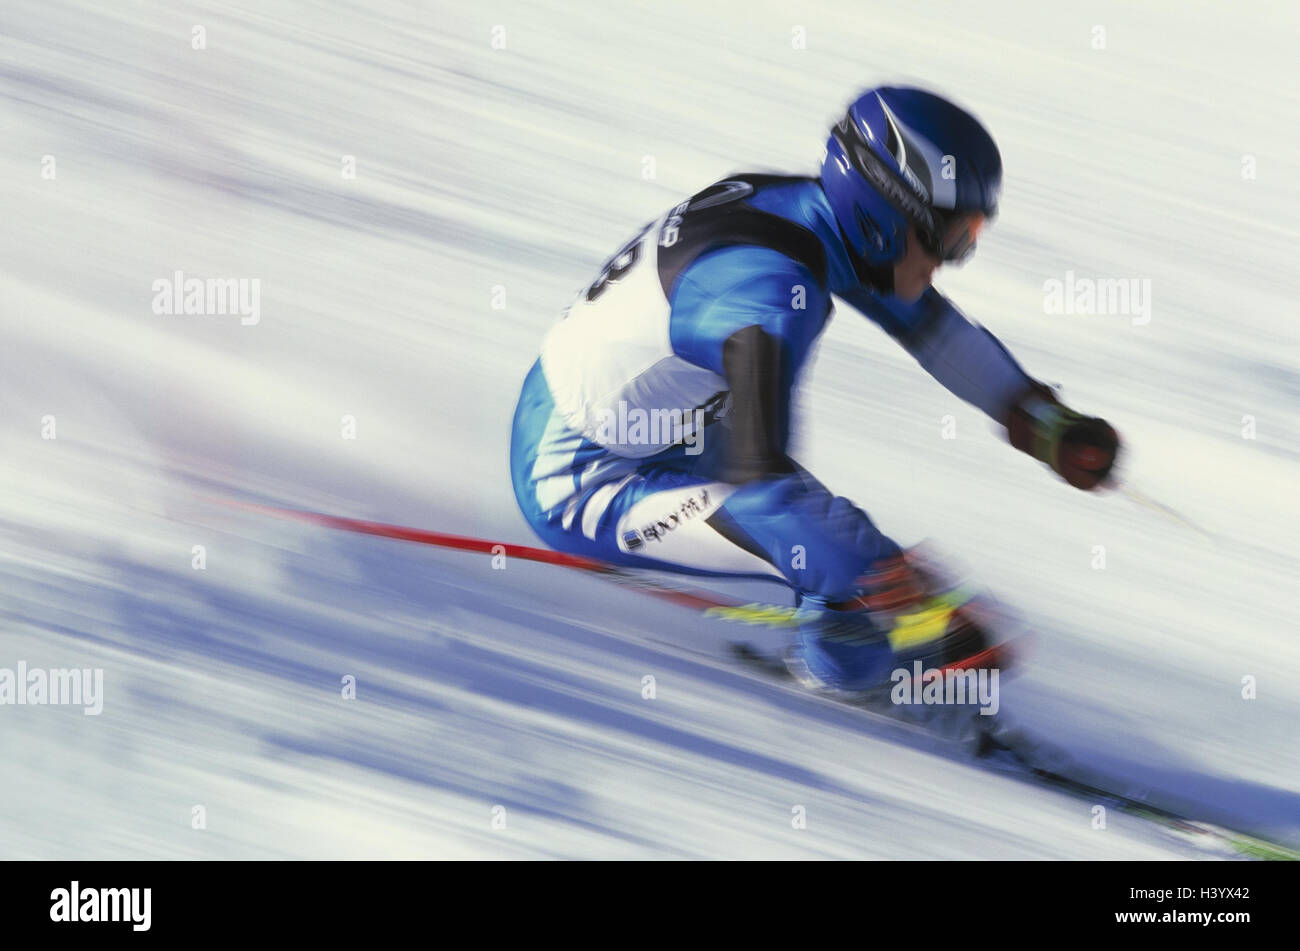 Ski racer, helped to pull, blur skiing, downhill race, giant slalom, gigantic goal foliage, downhill skiing, ski race, race, event, racing driver, skier, skiing, alpine sport, sport, leisure time, hobby, activity, speed, dynamics, motion, tempo, ski equip Stock Photo